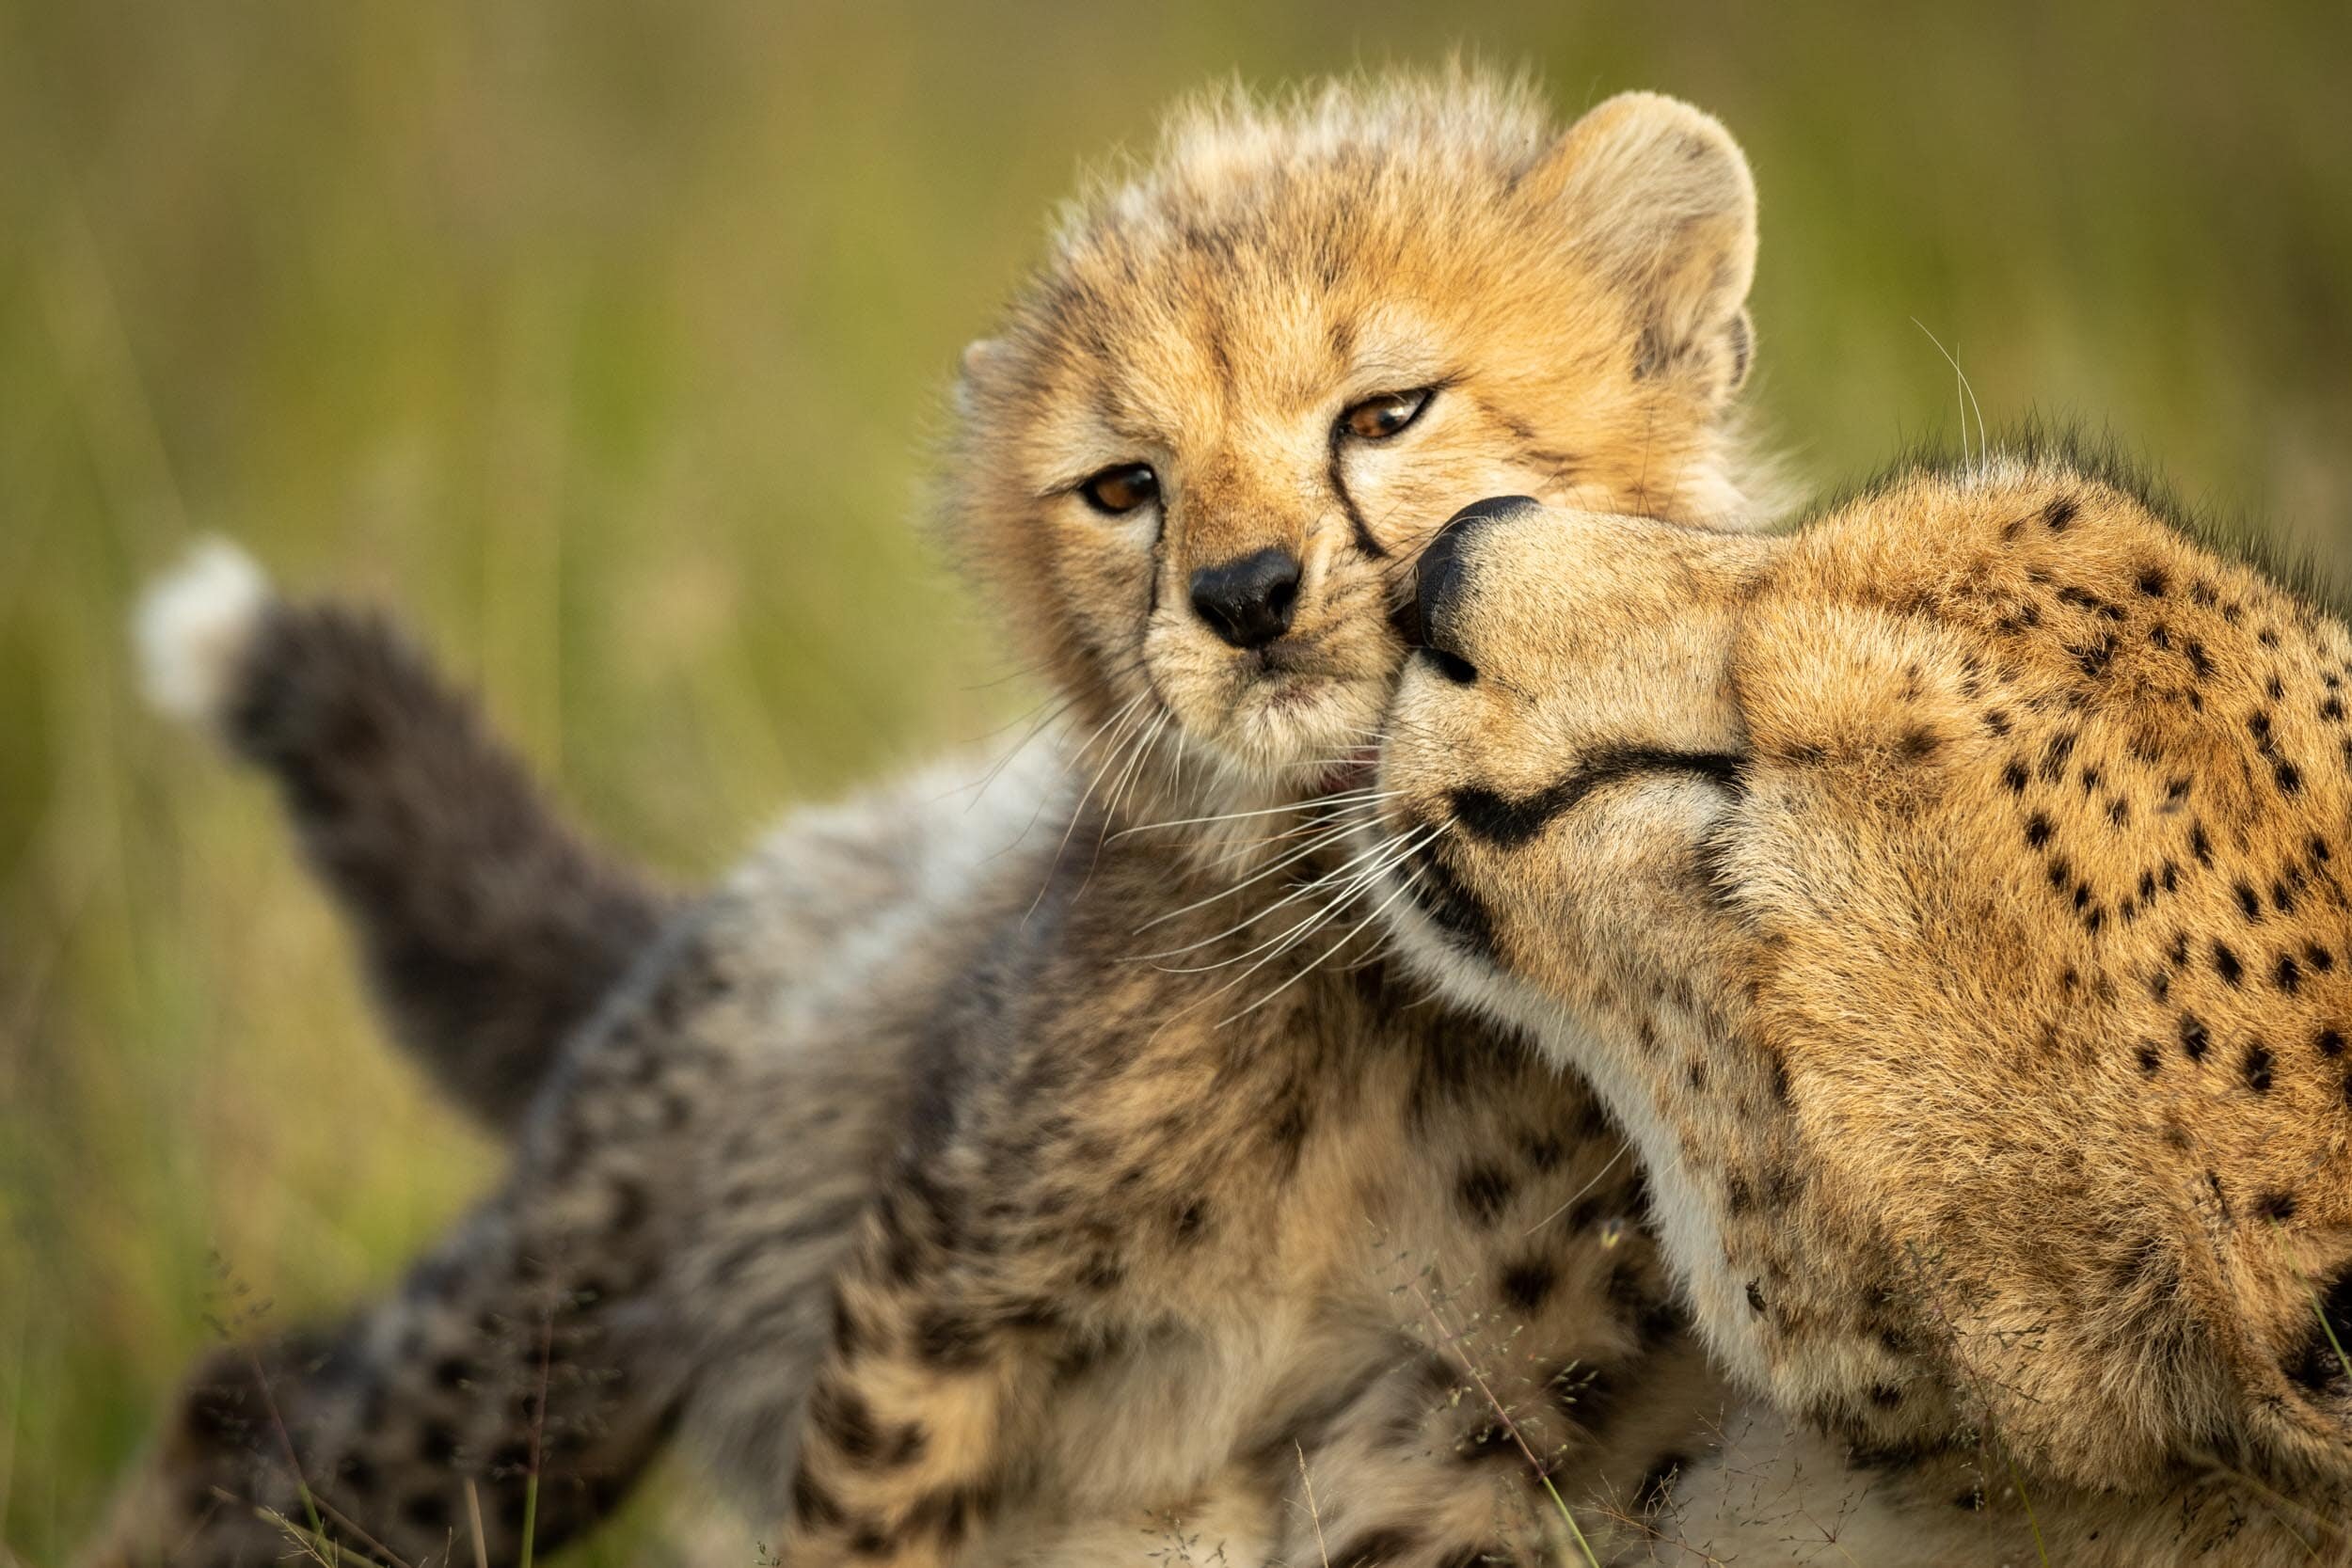 Close-up of female cheetah nuzzling young cub: 63 downloads